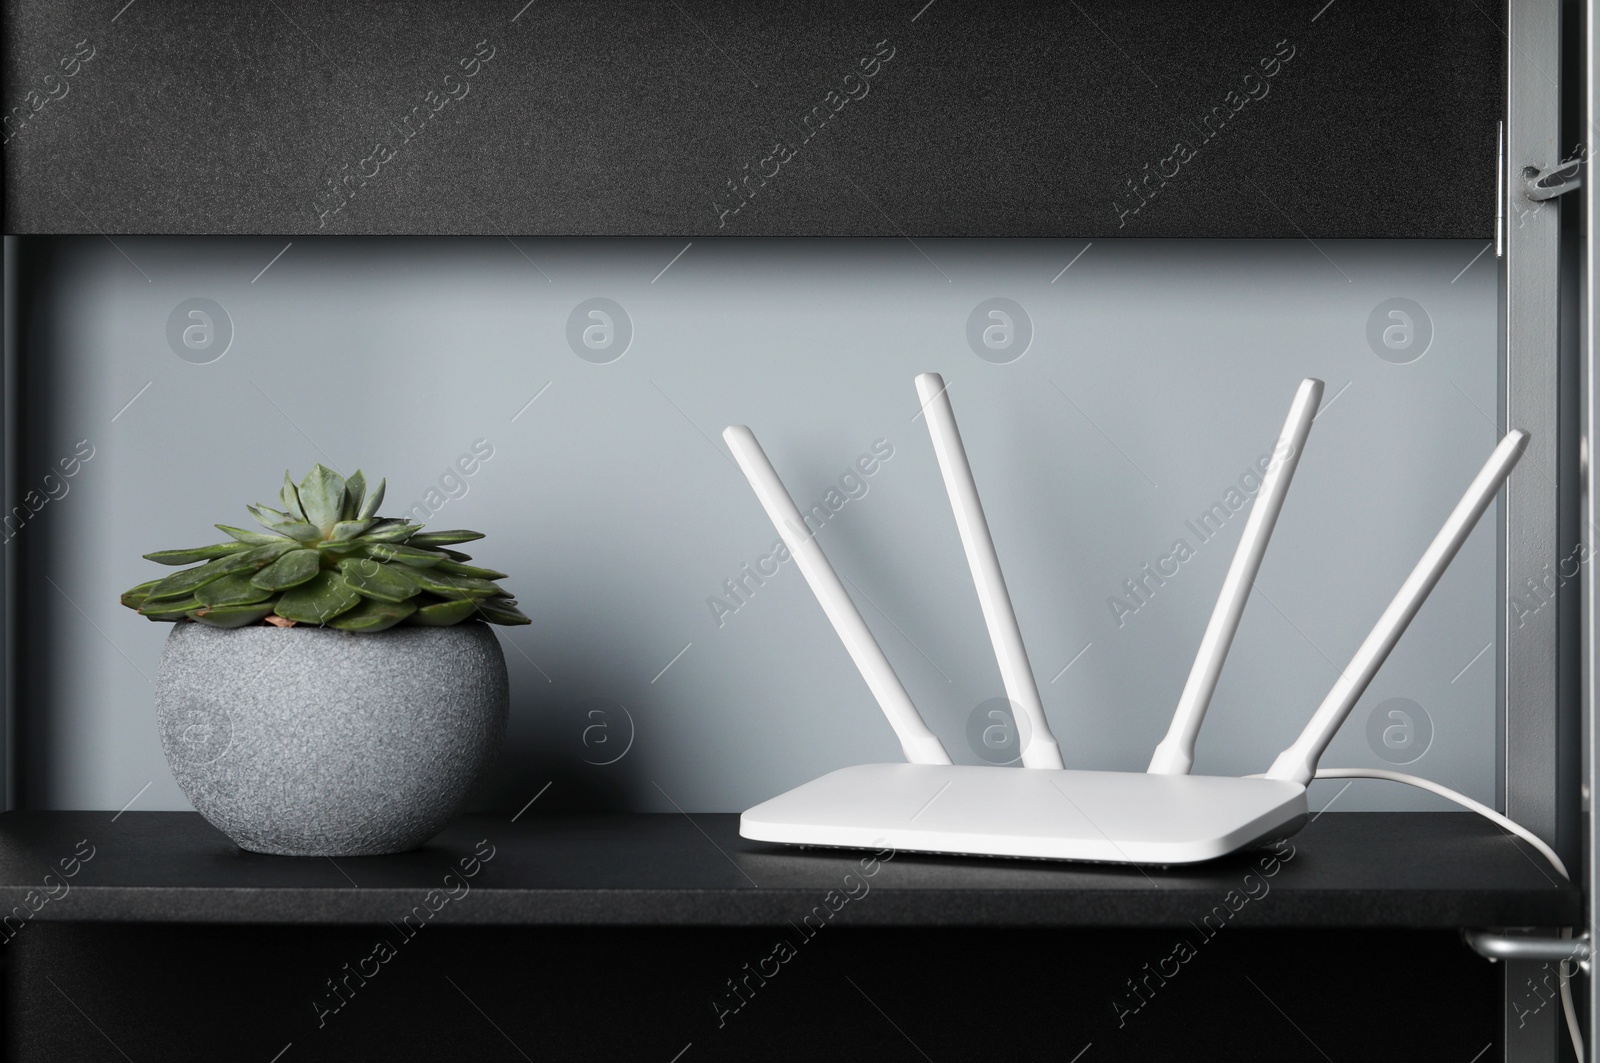 Photo of New white Wi-Fi router near potted plant on black shelf